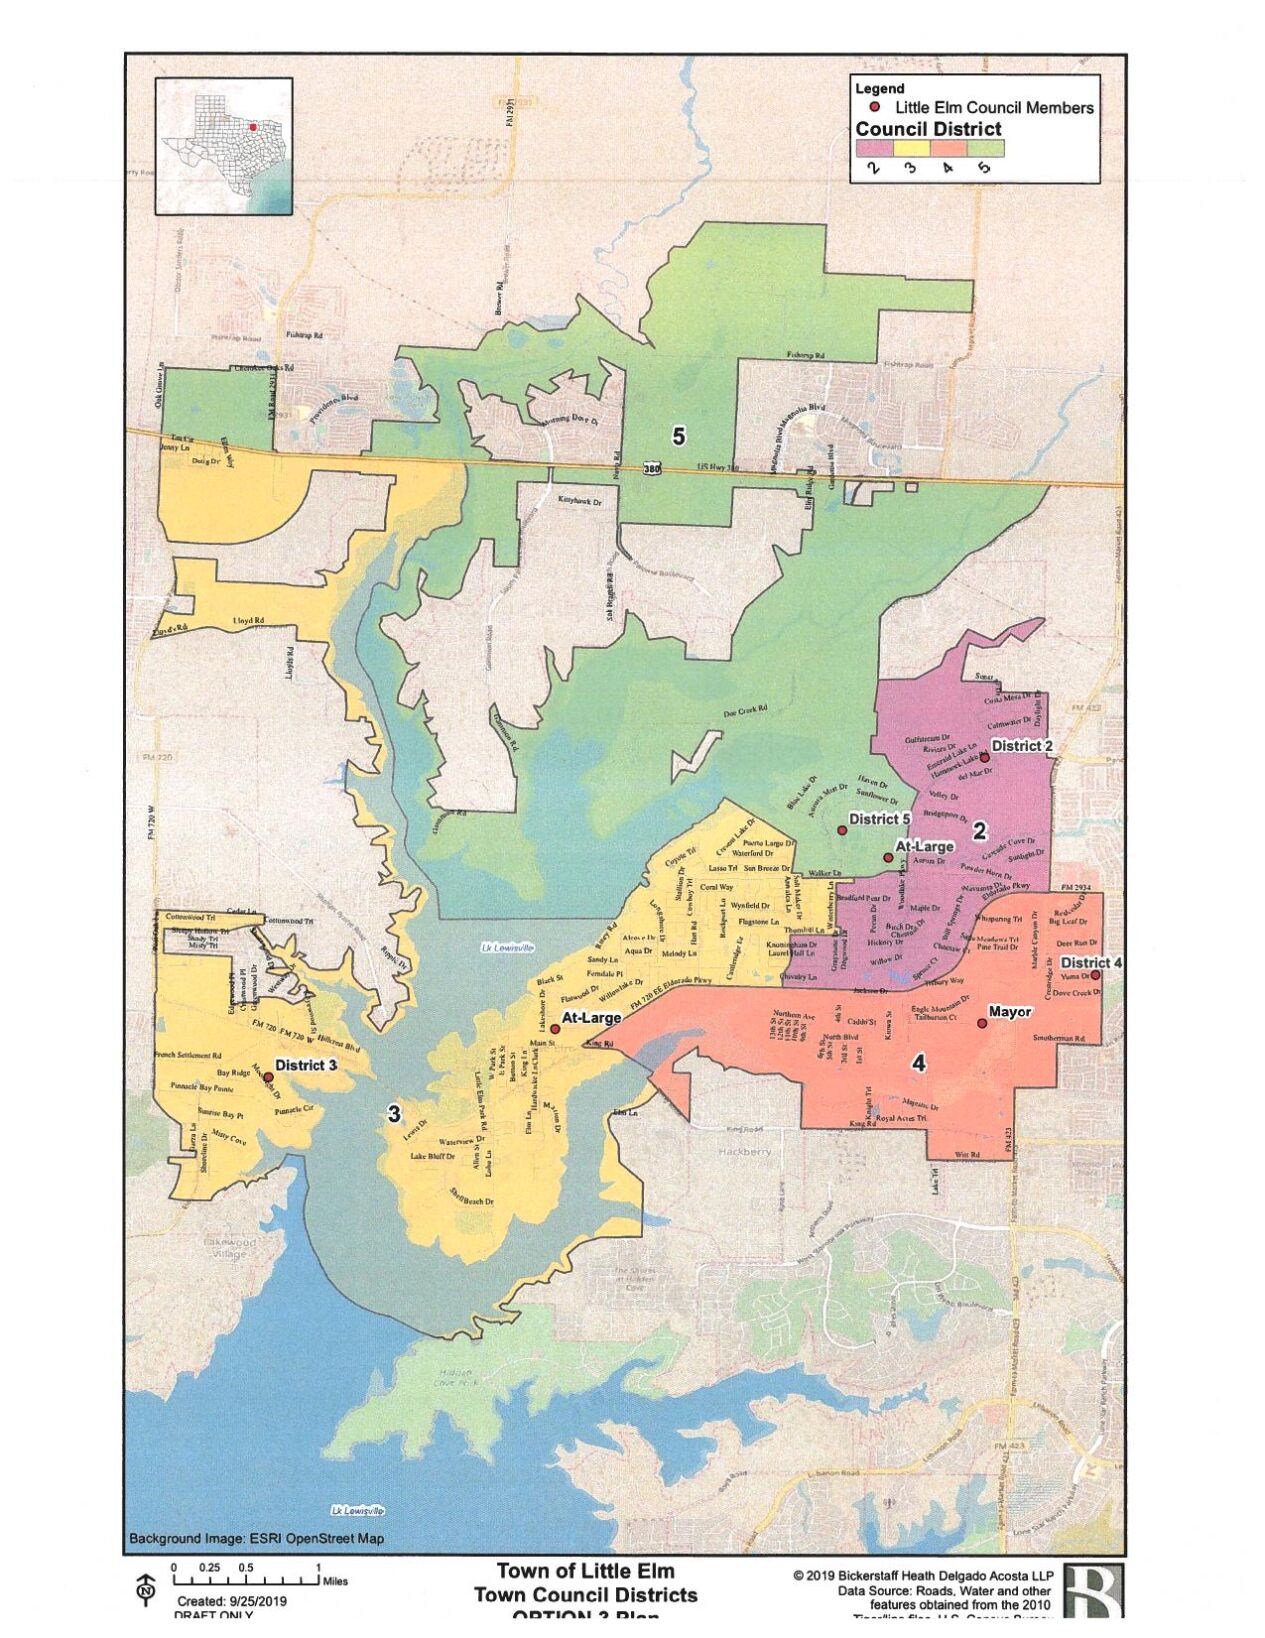 Little Elm to consider redistricting options, and what that may mean